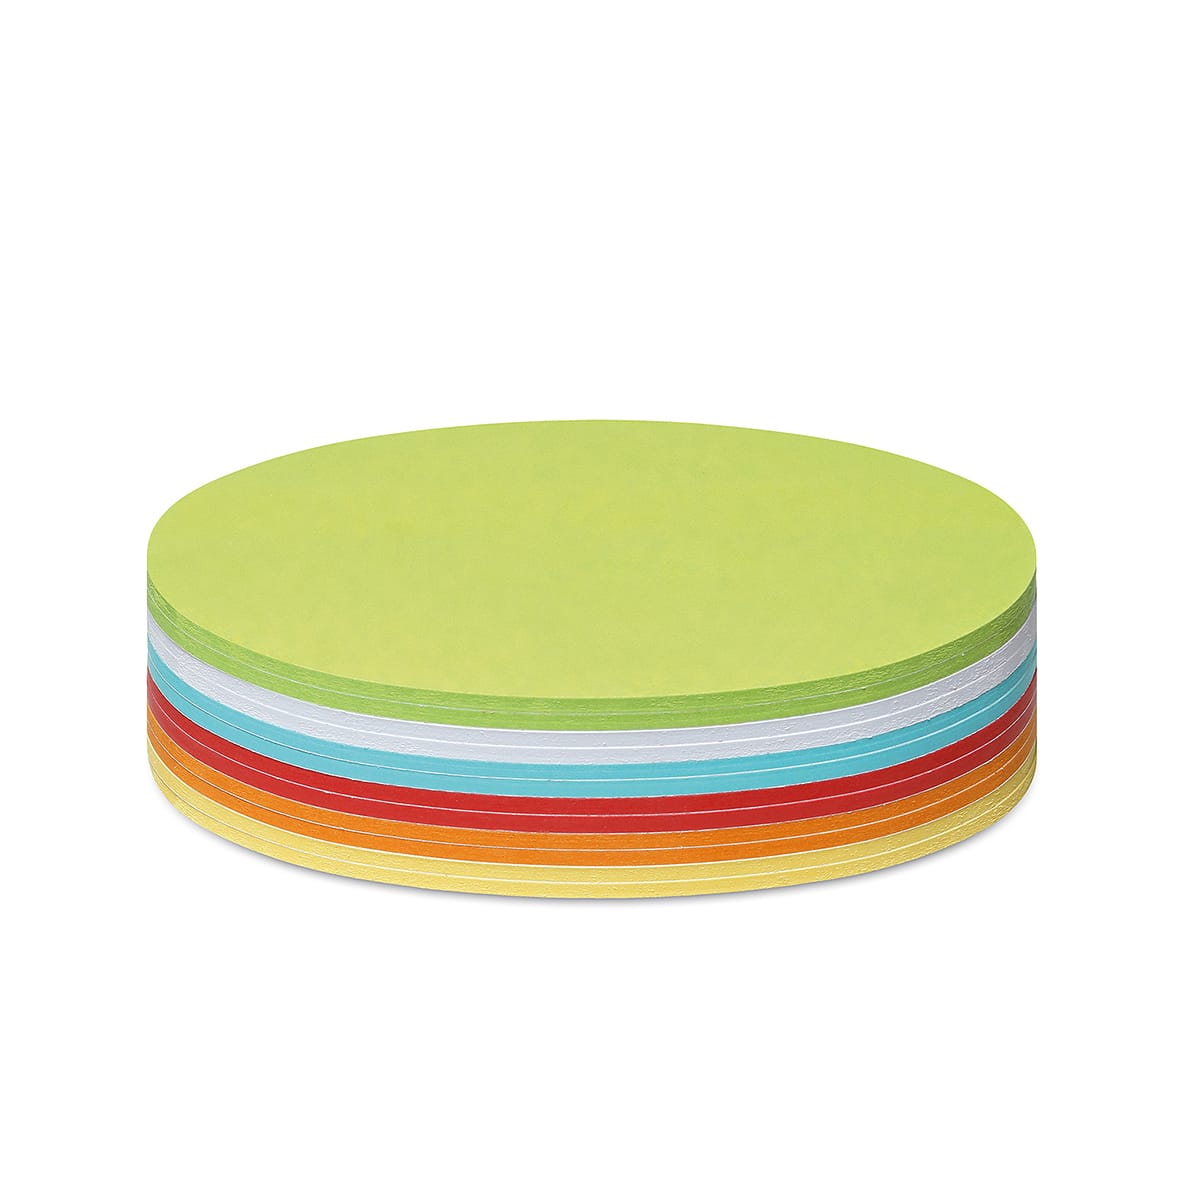 Stick-It Cards, oval, 300 sheets, assorted